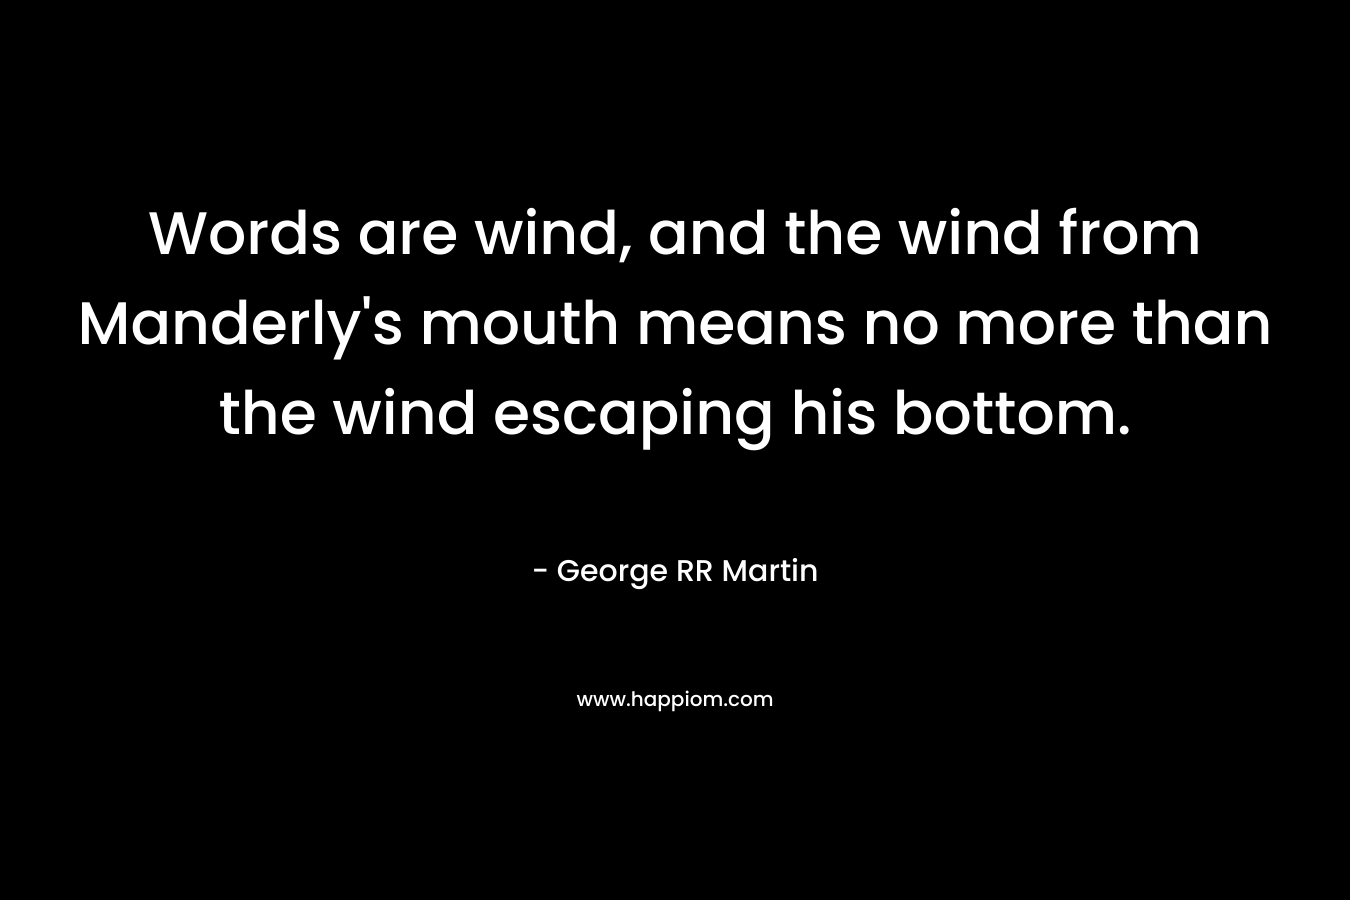 Words are wind, and the wind from Manderly's mouth means no more than the wind escaping his bottom.